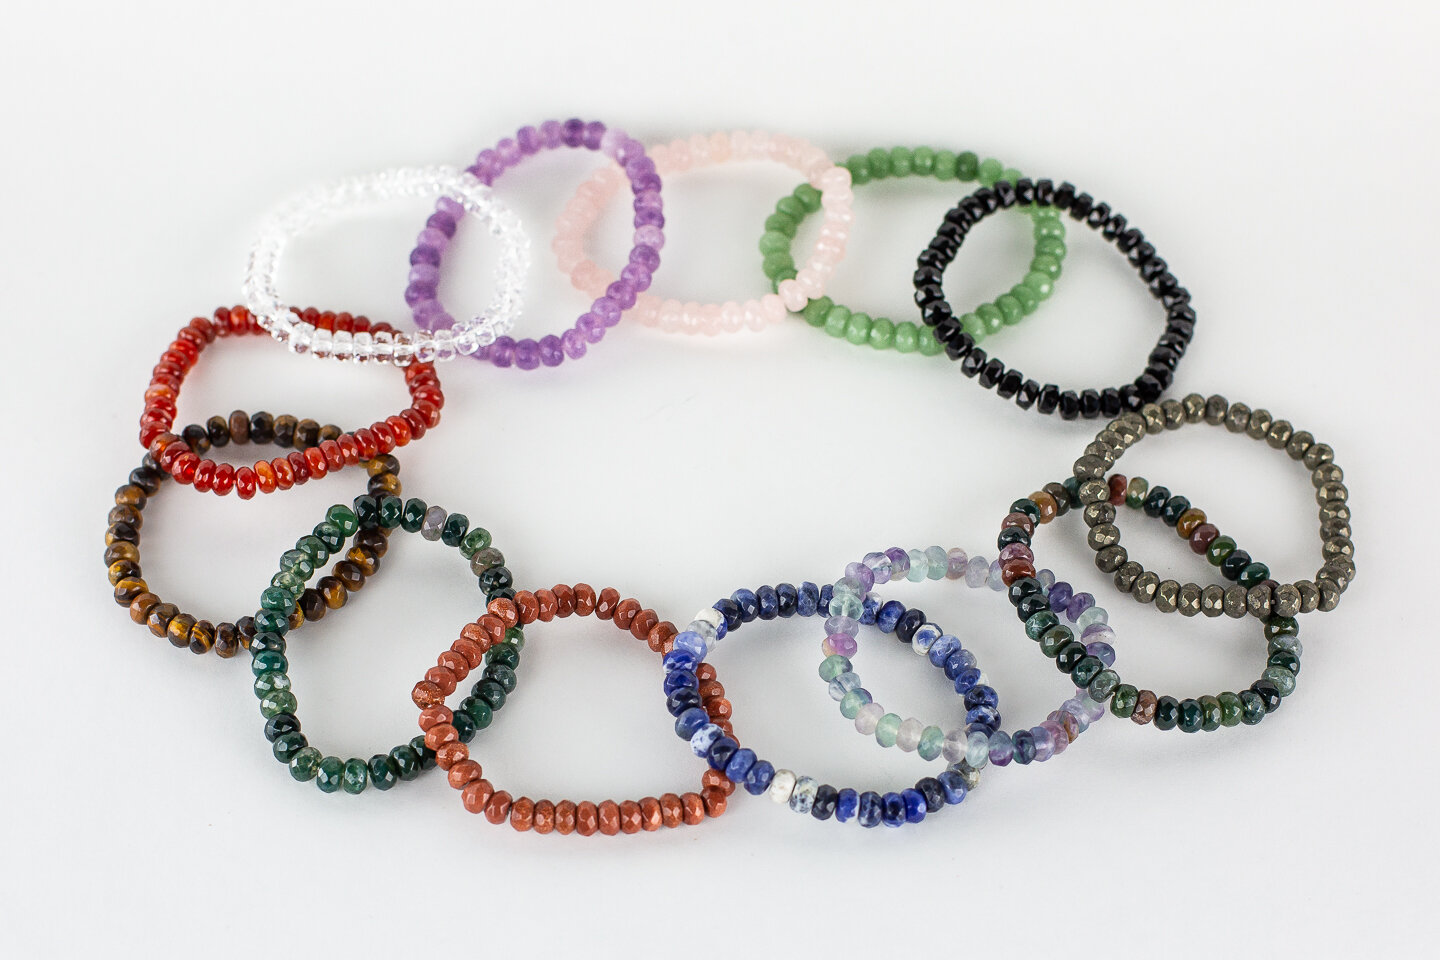 Stone and natural mineral bracelets - Lithotherapy - France Minerals